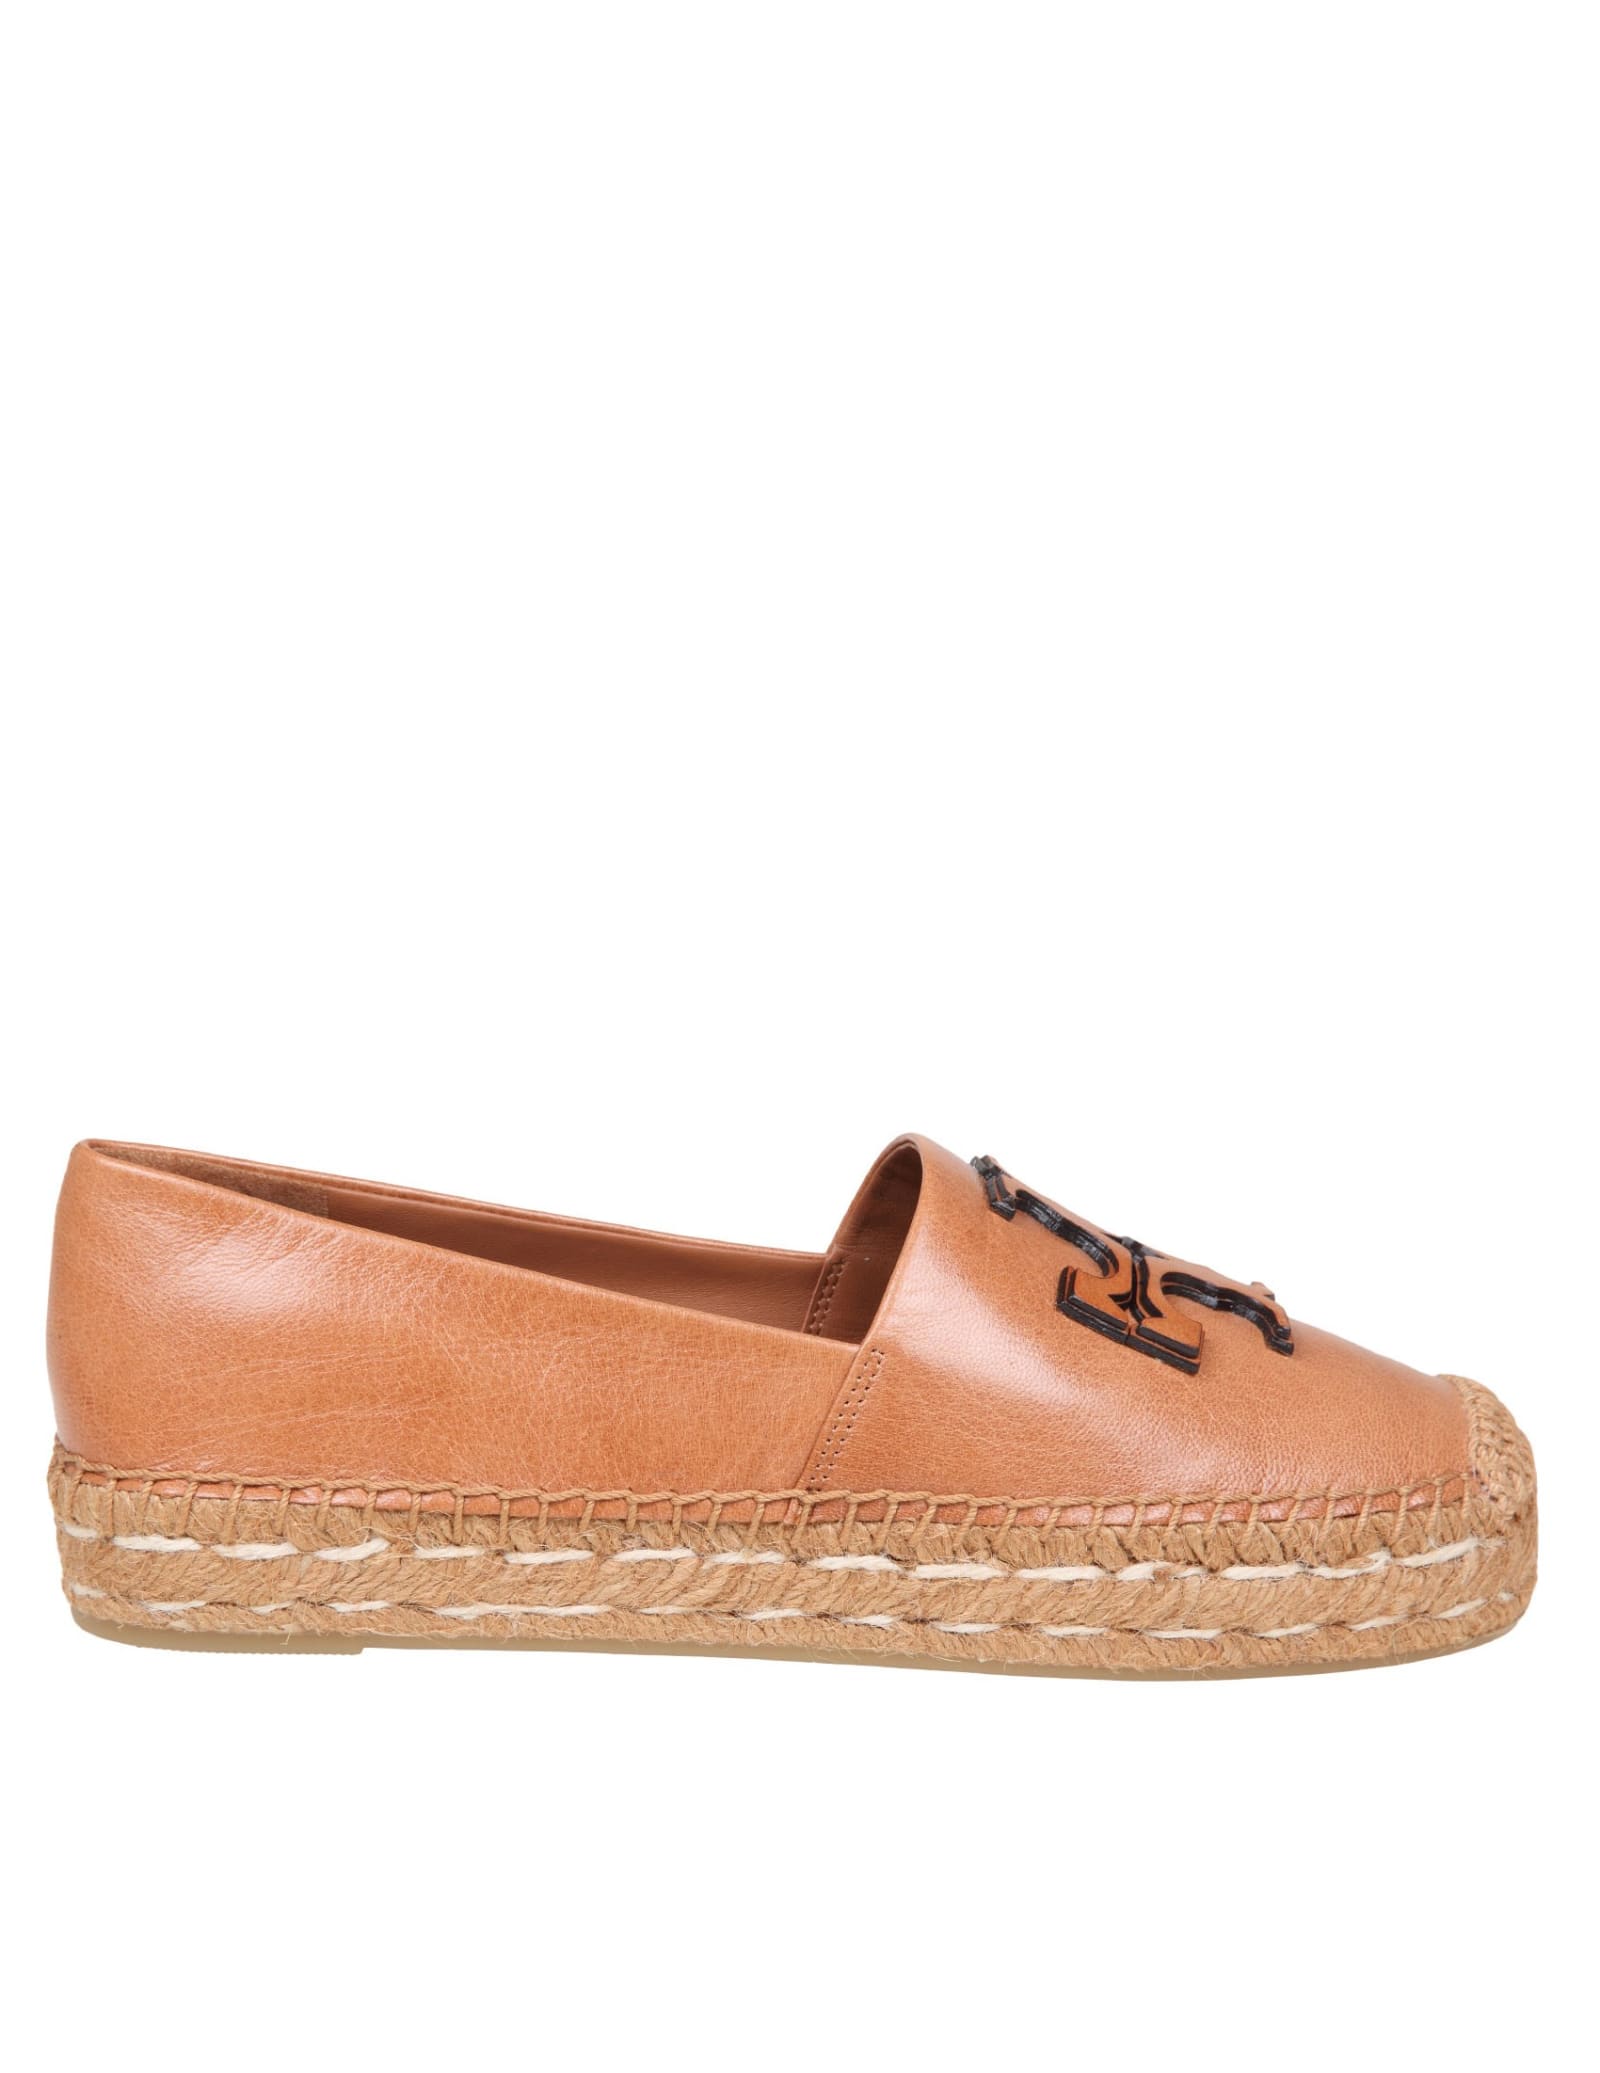 Shop Tory Burch Ines Platform Espadrille In Tan Color Leather